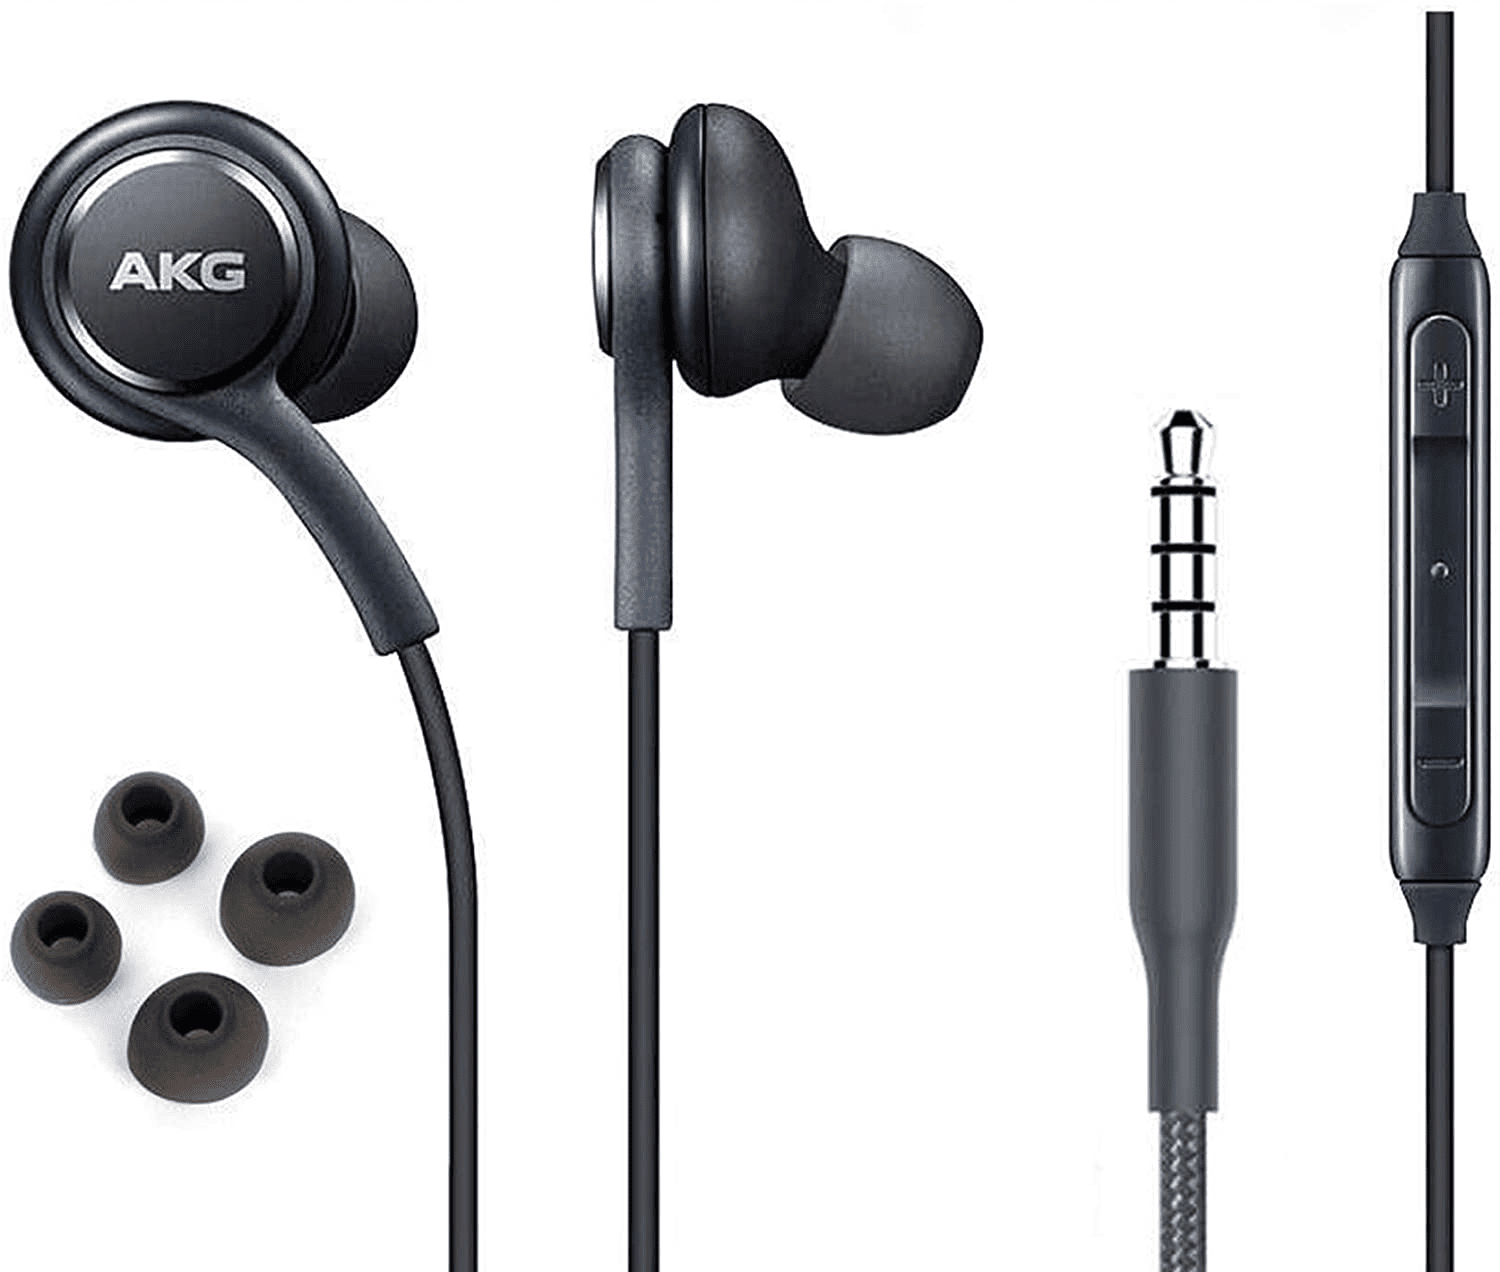 Ijzig conversie Pebish OEM InEar Earbuds Stereo Headphones for Huawei Ascend P7 mini Plus Cable -  Designed by AKG - with Microphone and Volume Buttons (Black) - Walmart.com